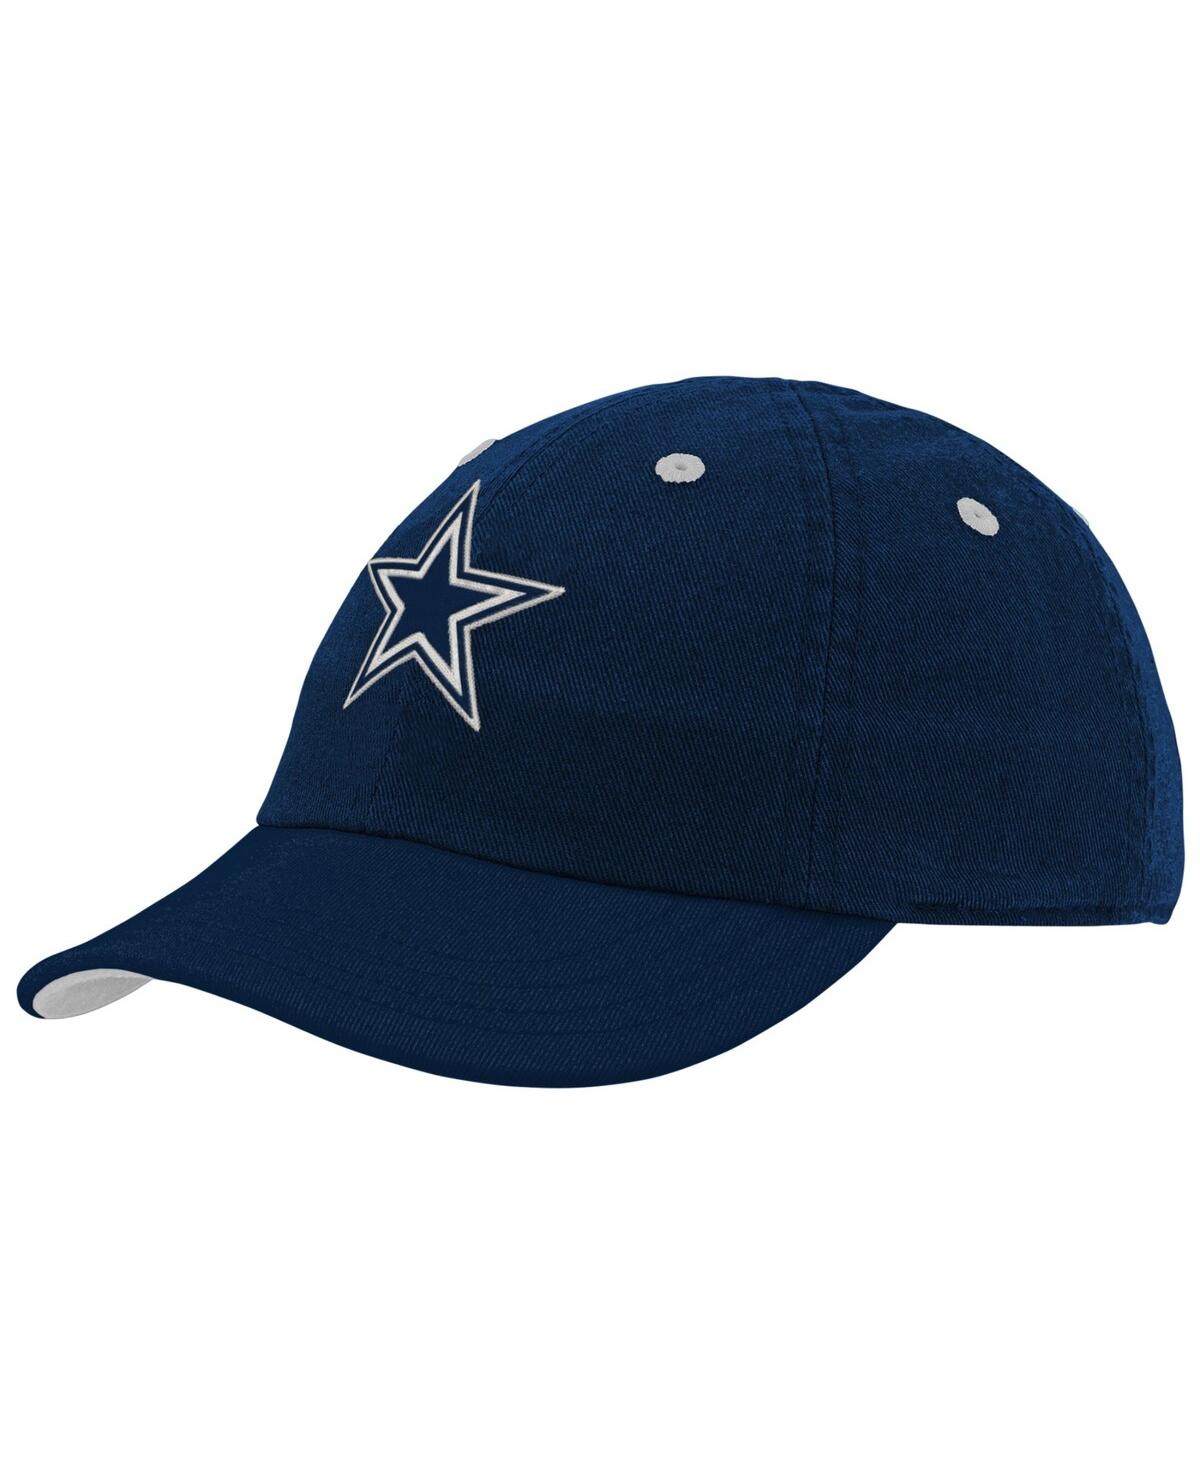 Outerstuff Babies' Infant Boys And Girls Navy Dallas Cowboys Team Slouch Flex Hat